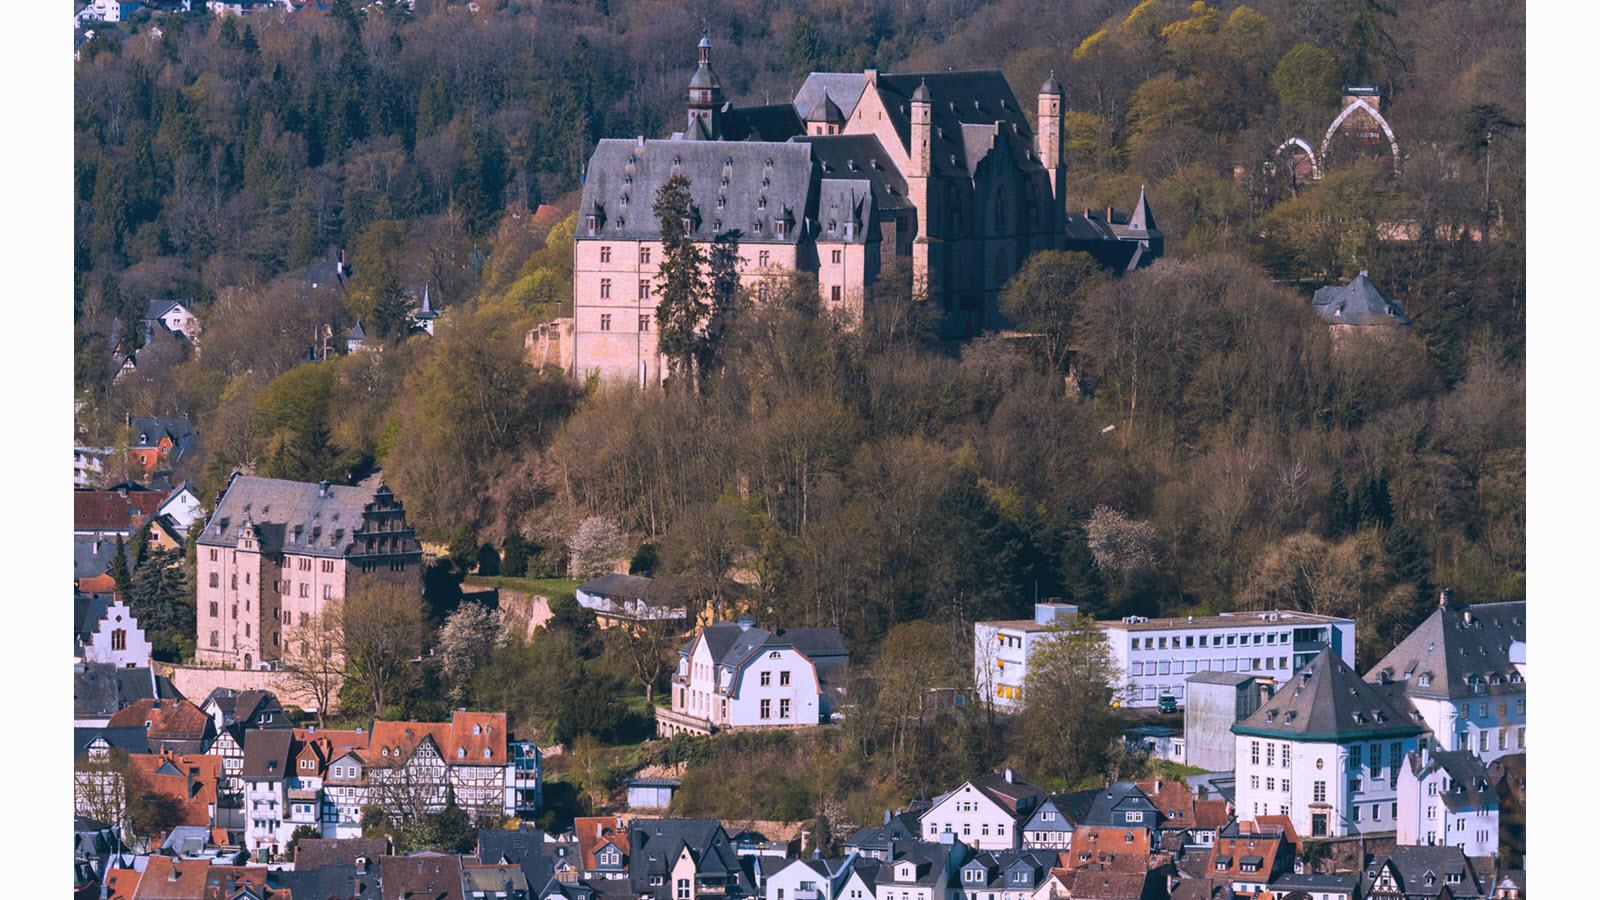 The landscape of Marburg, Germany, featuring a castle on the hillside